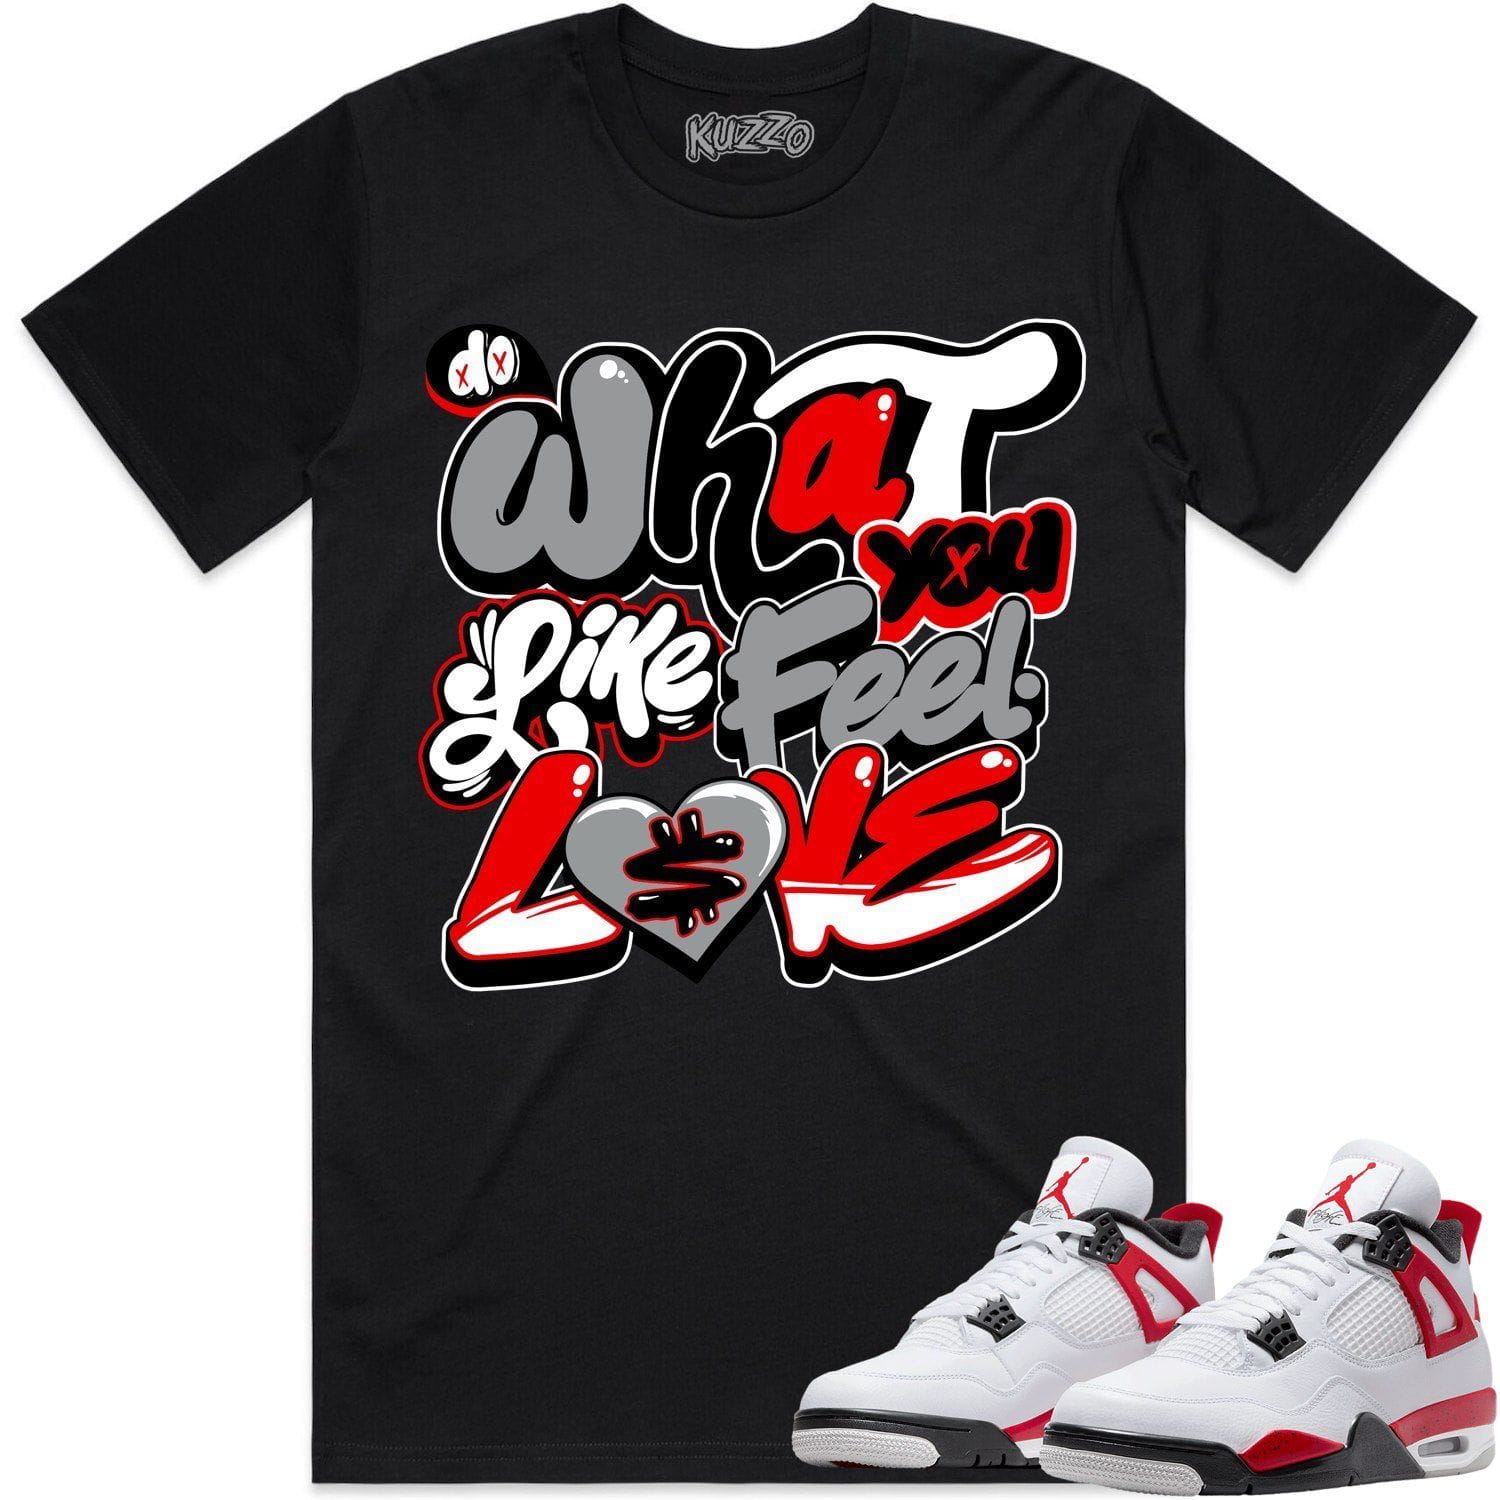 Red Cement 4s Shirt - Jordan Retro 4 Red Cement Shirts - Red Sauce